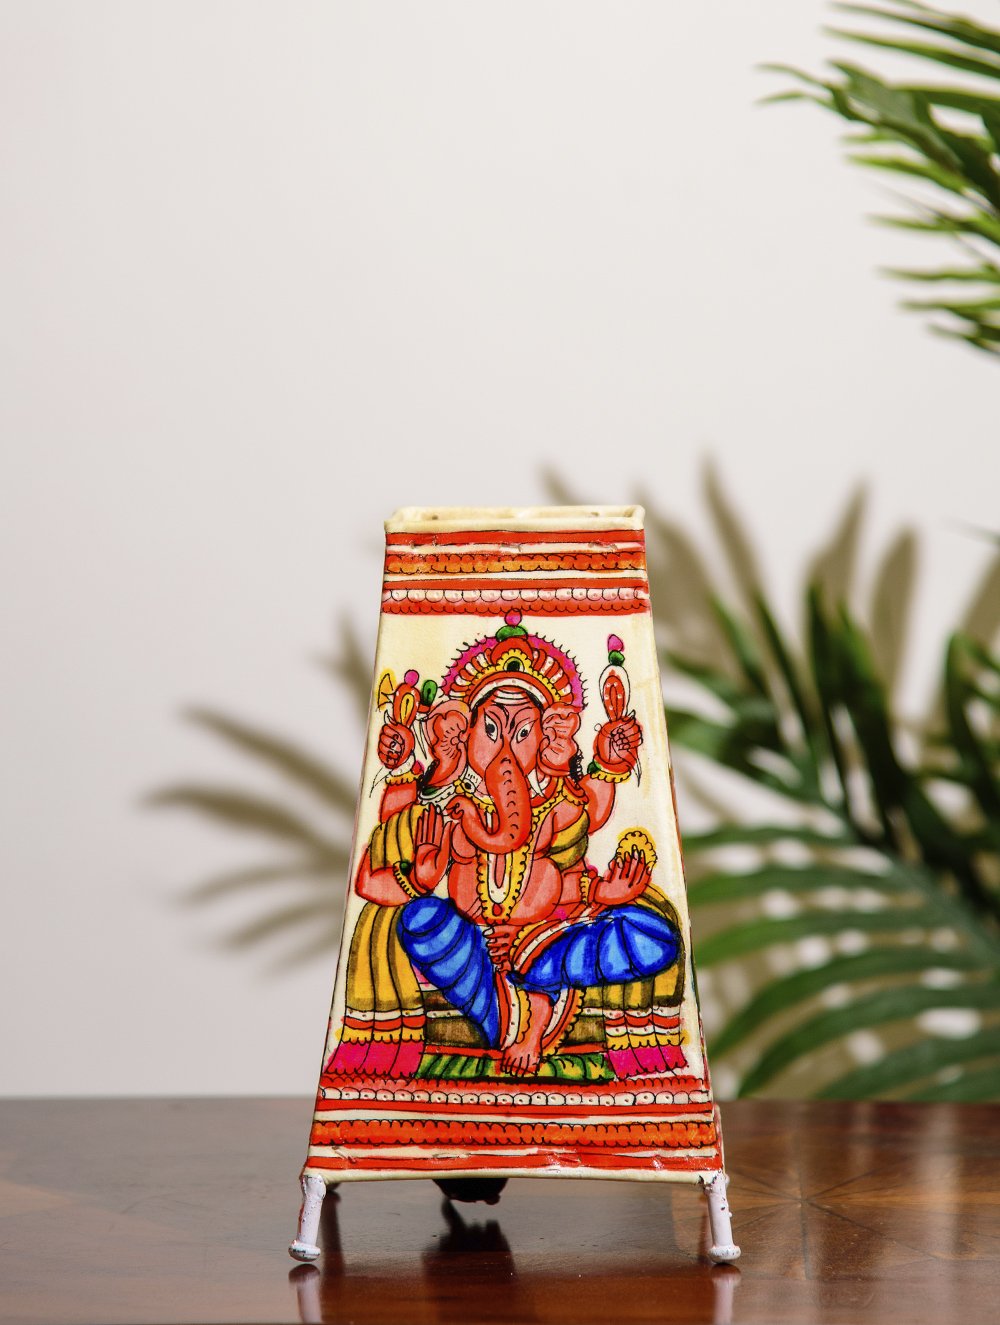 Load image into Gallery viewer, The India Craft House Andhra Multicoloured Painted Leather Table Lamp Shade - Vinayak Ganesha